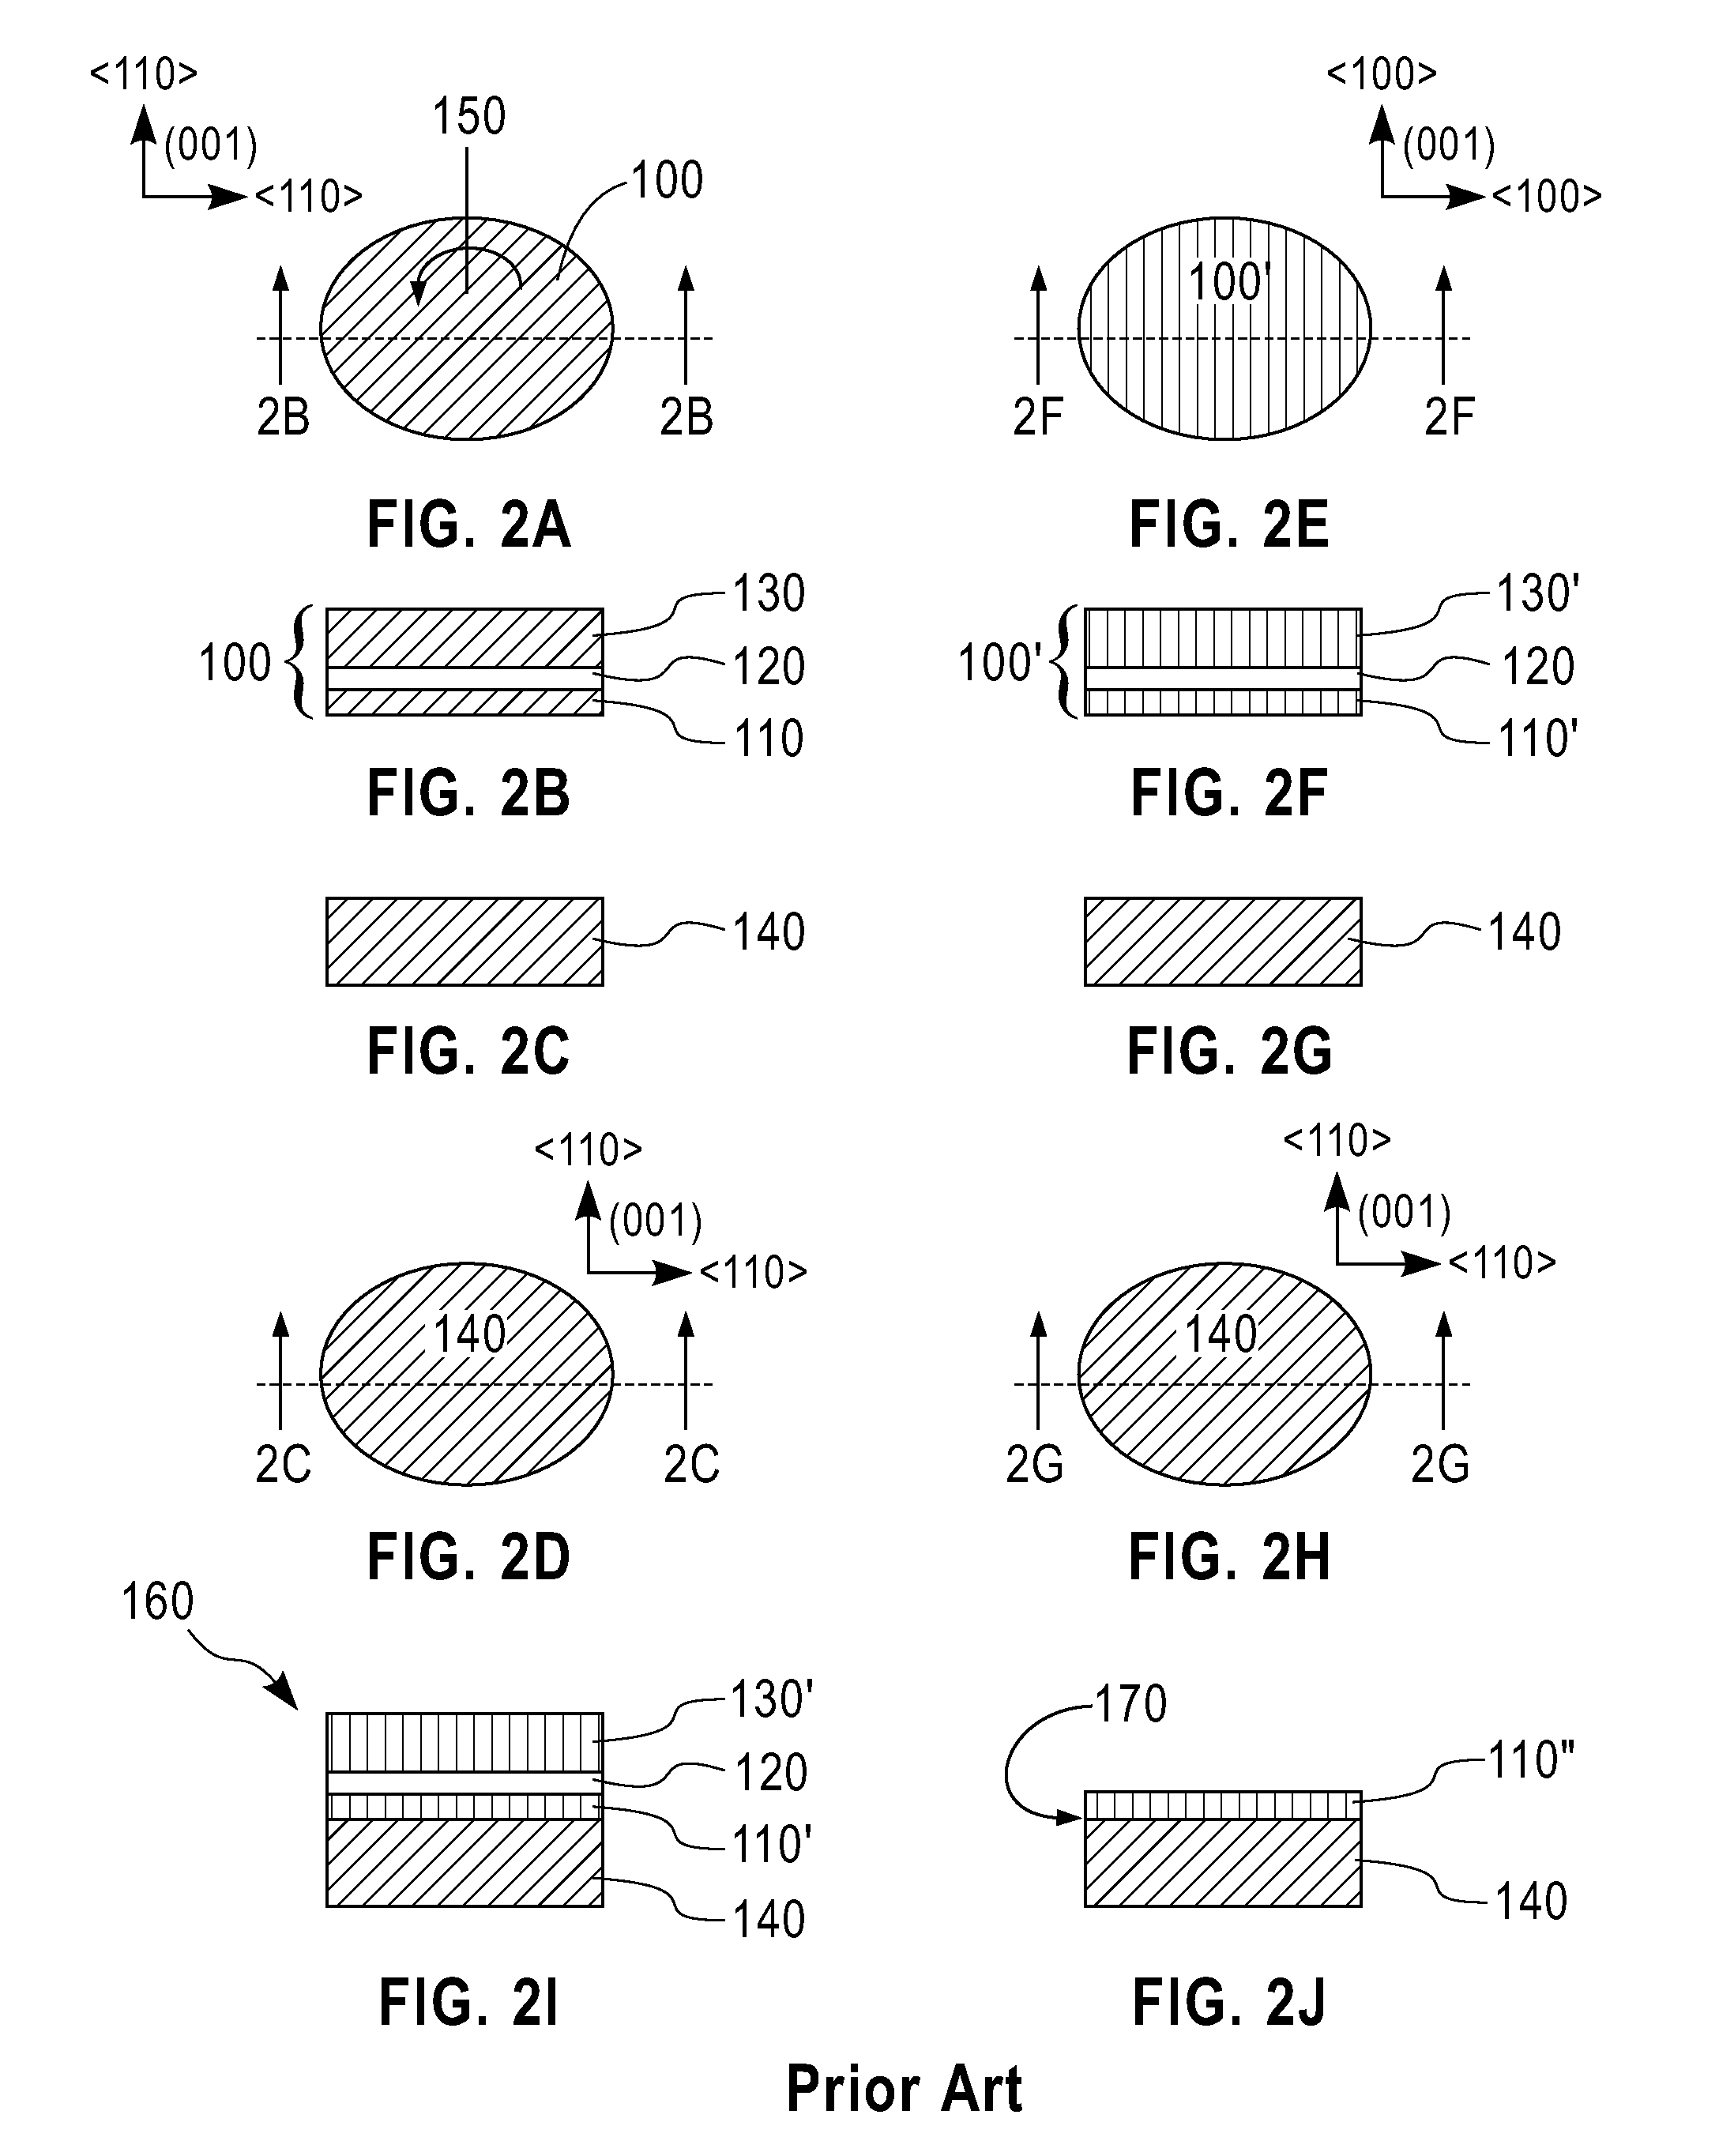 Strained-channel fet comprising twist-bonded semiconductor layer